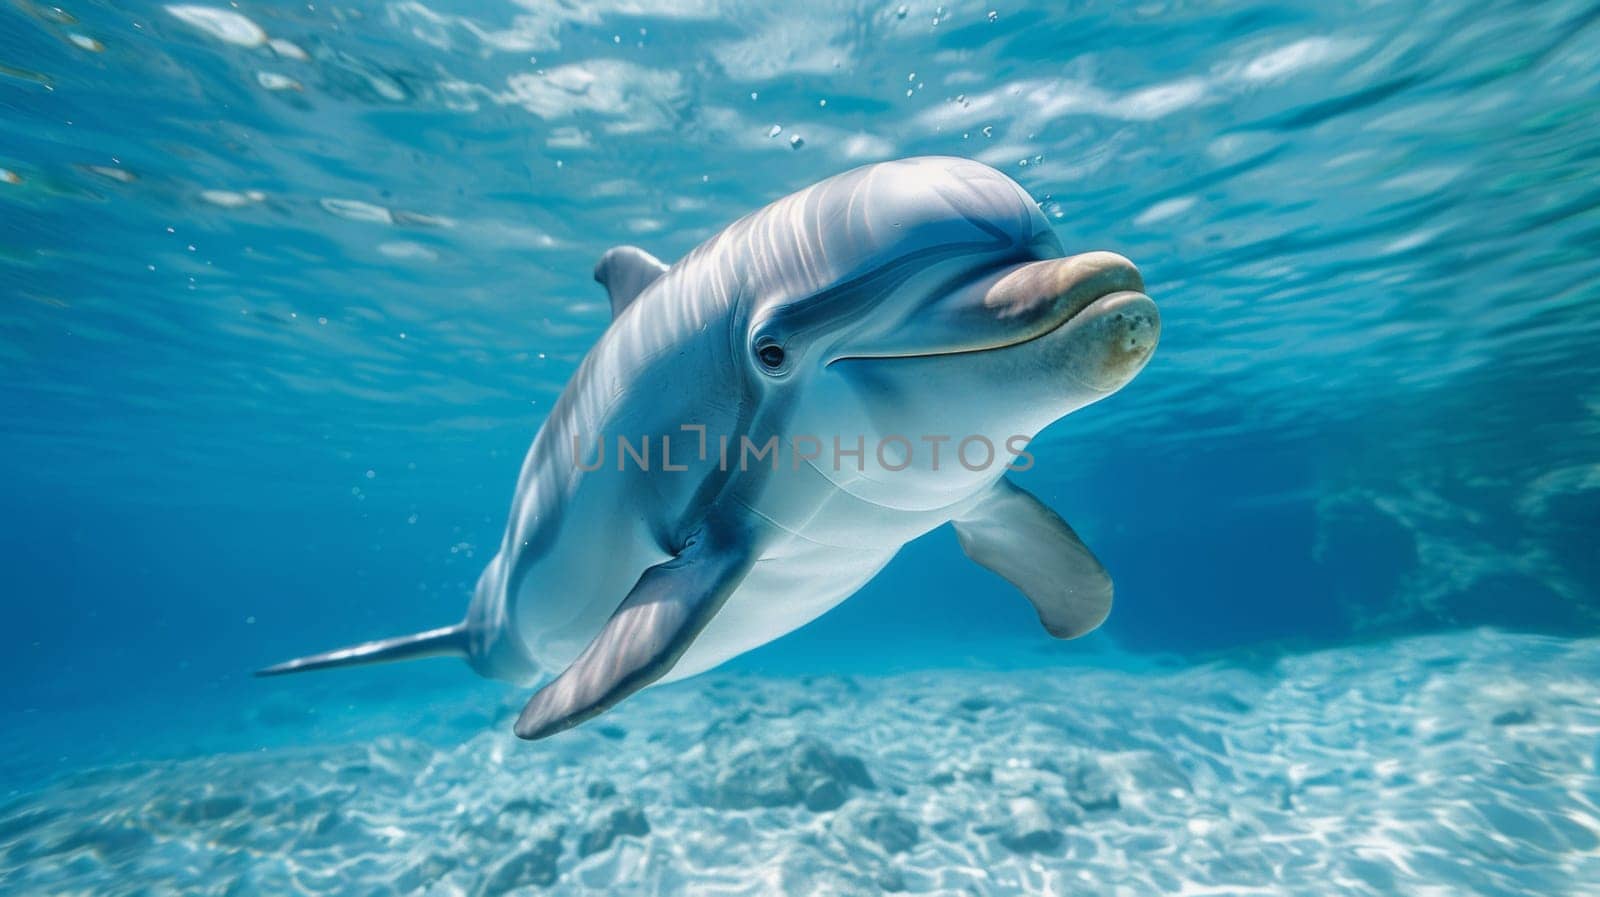 A dolphin swimming in the ocean under blue water